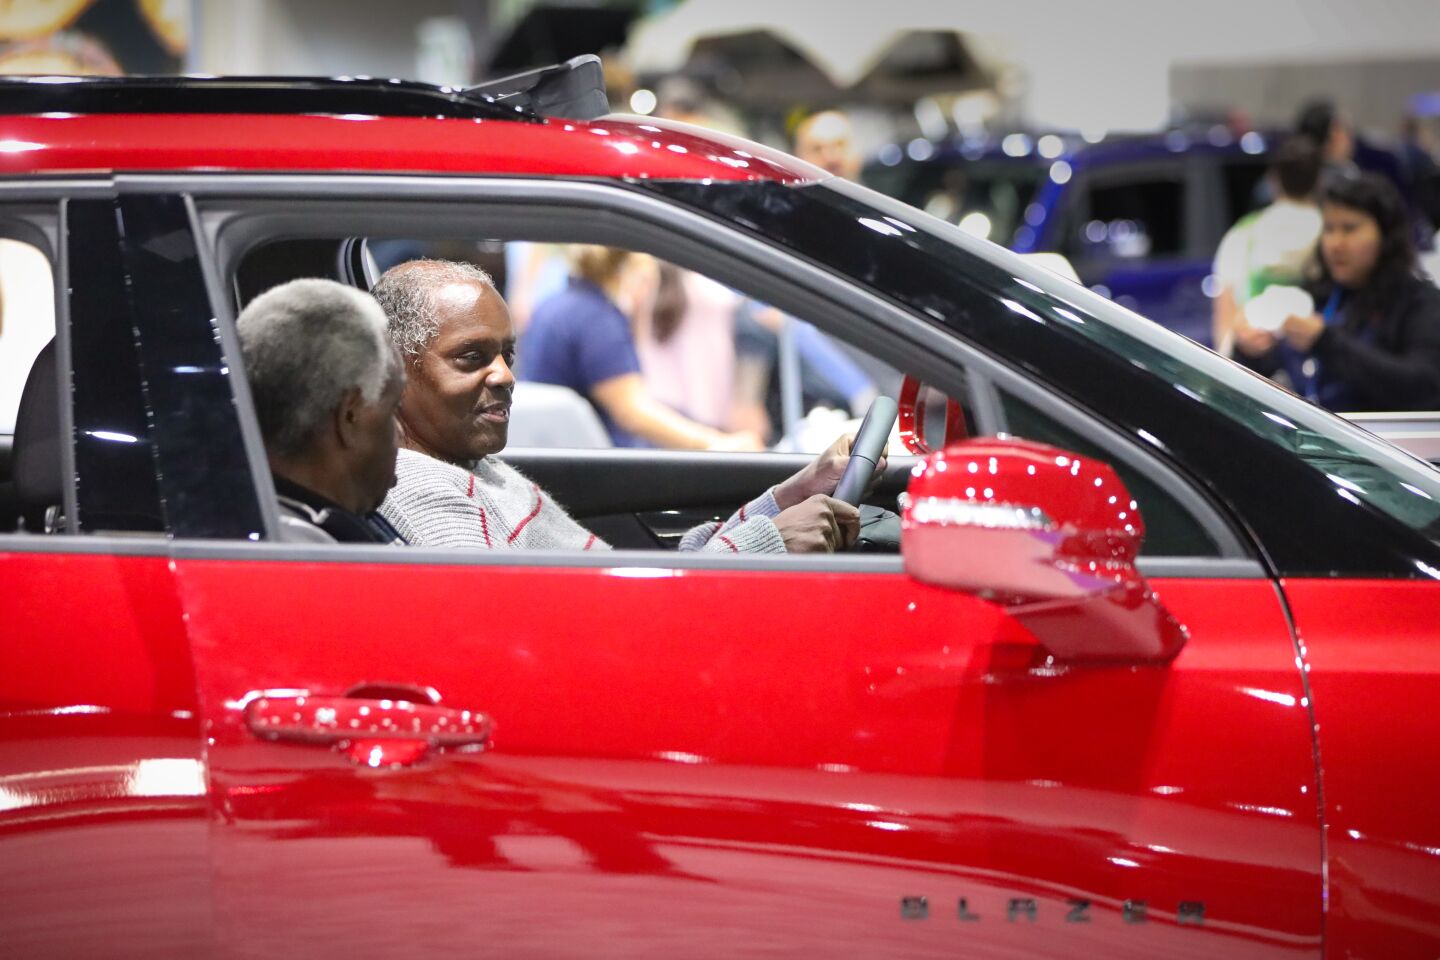 Richard Willston, foreground and Elmo Dill, background, both from Kensington, sit in a 2020 Chevrolet Blazer RS during the 2020 San Diego International Auto Show at the San Diego Convention Center, January 4, 2020.